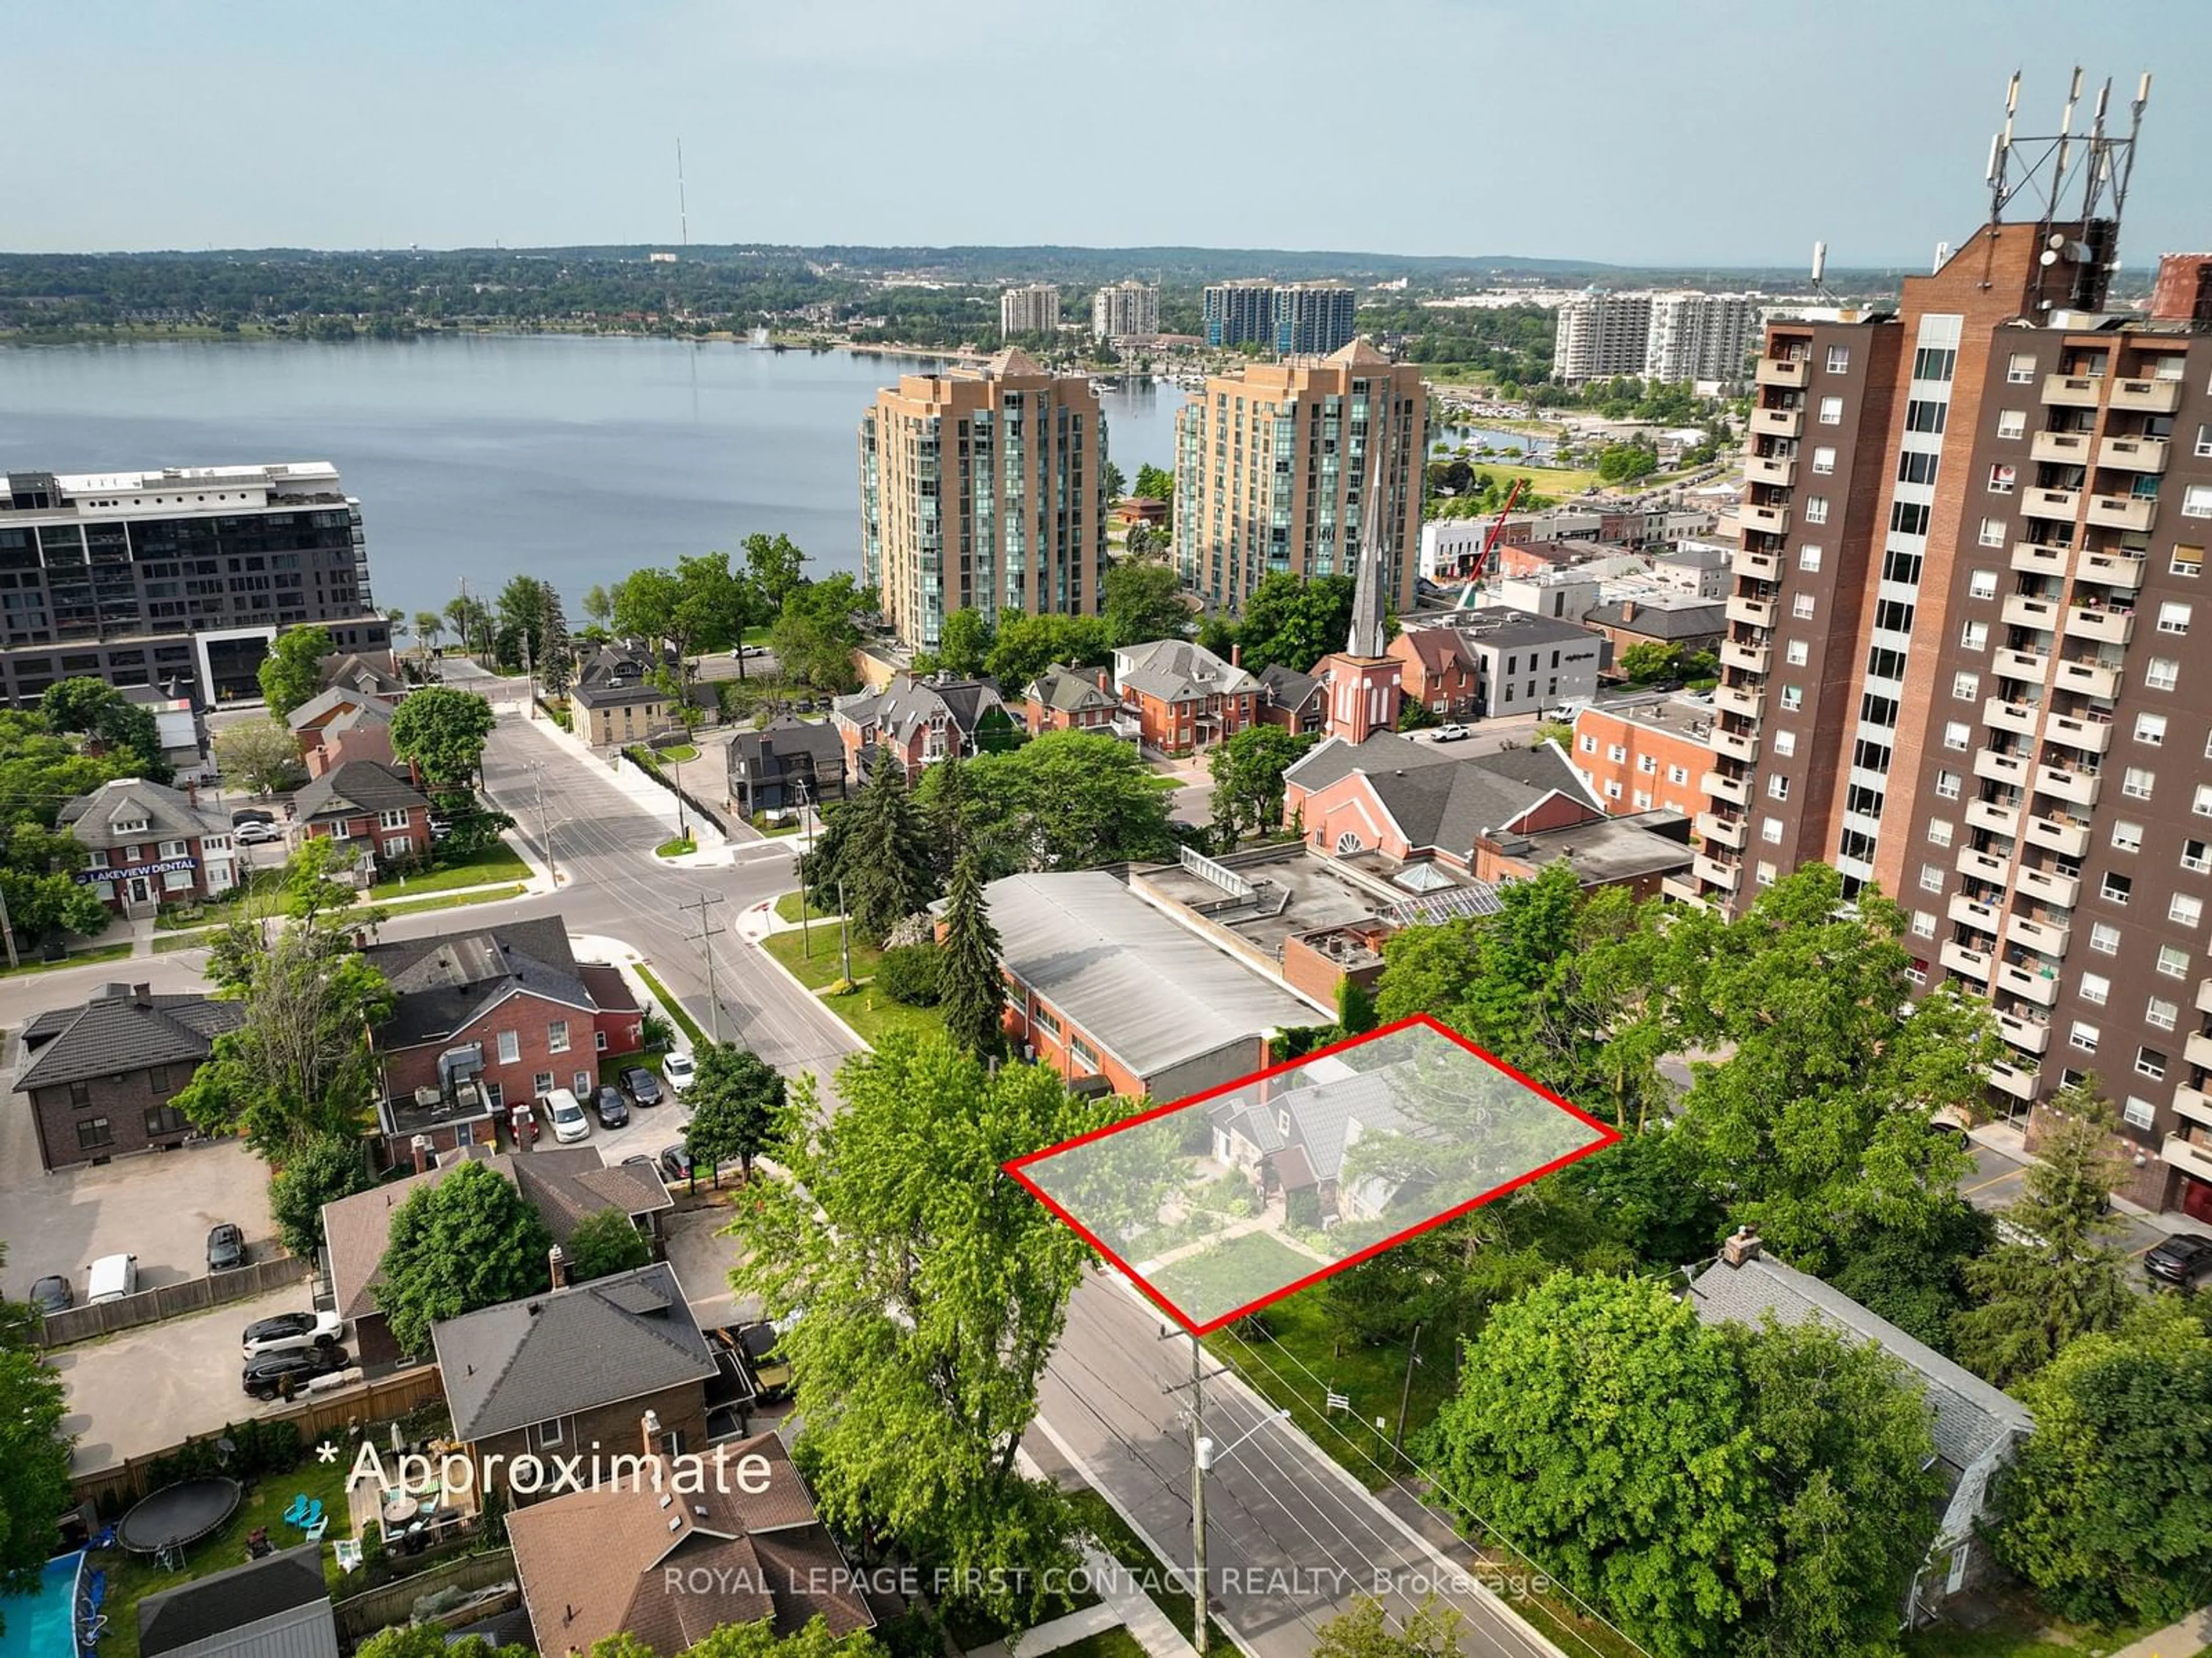 Lakeview for 20 Poyntz St, Barrie Ontario L4M 3N9